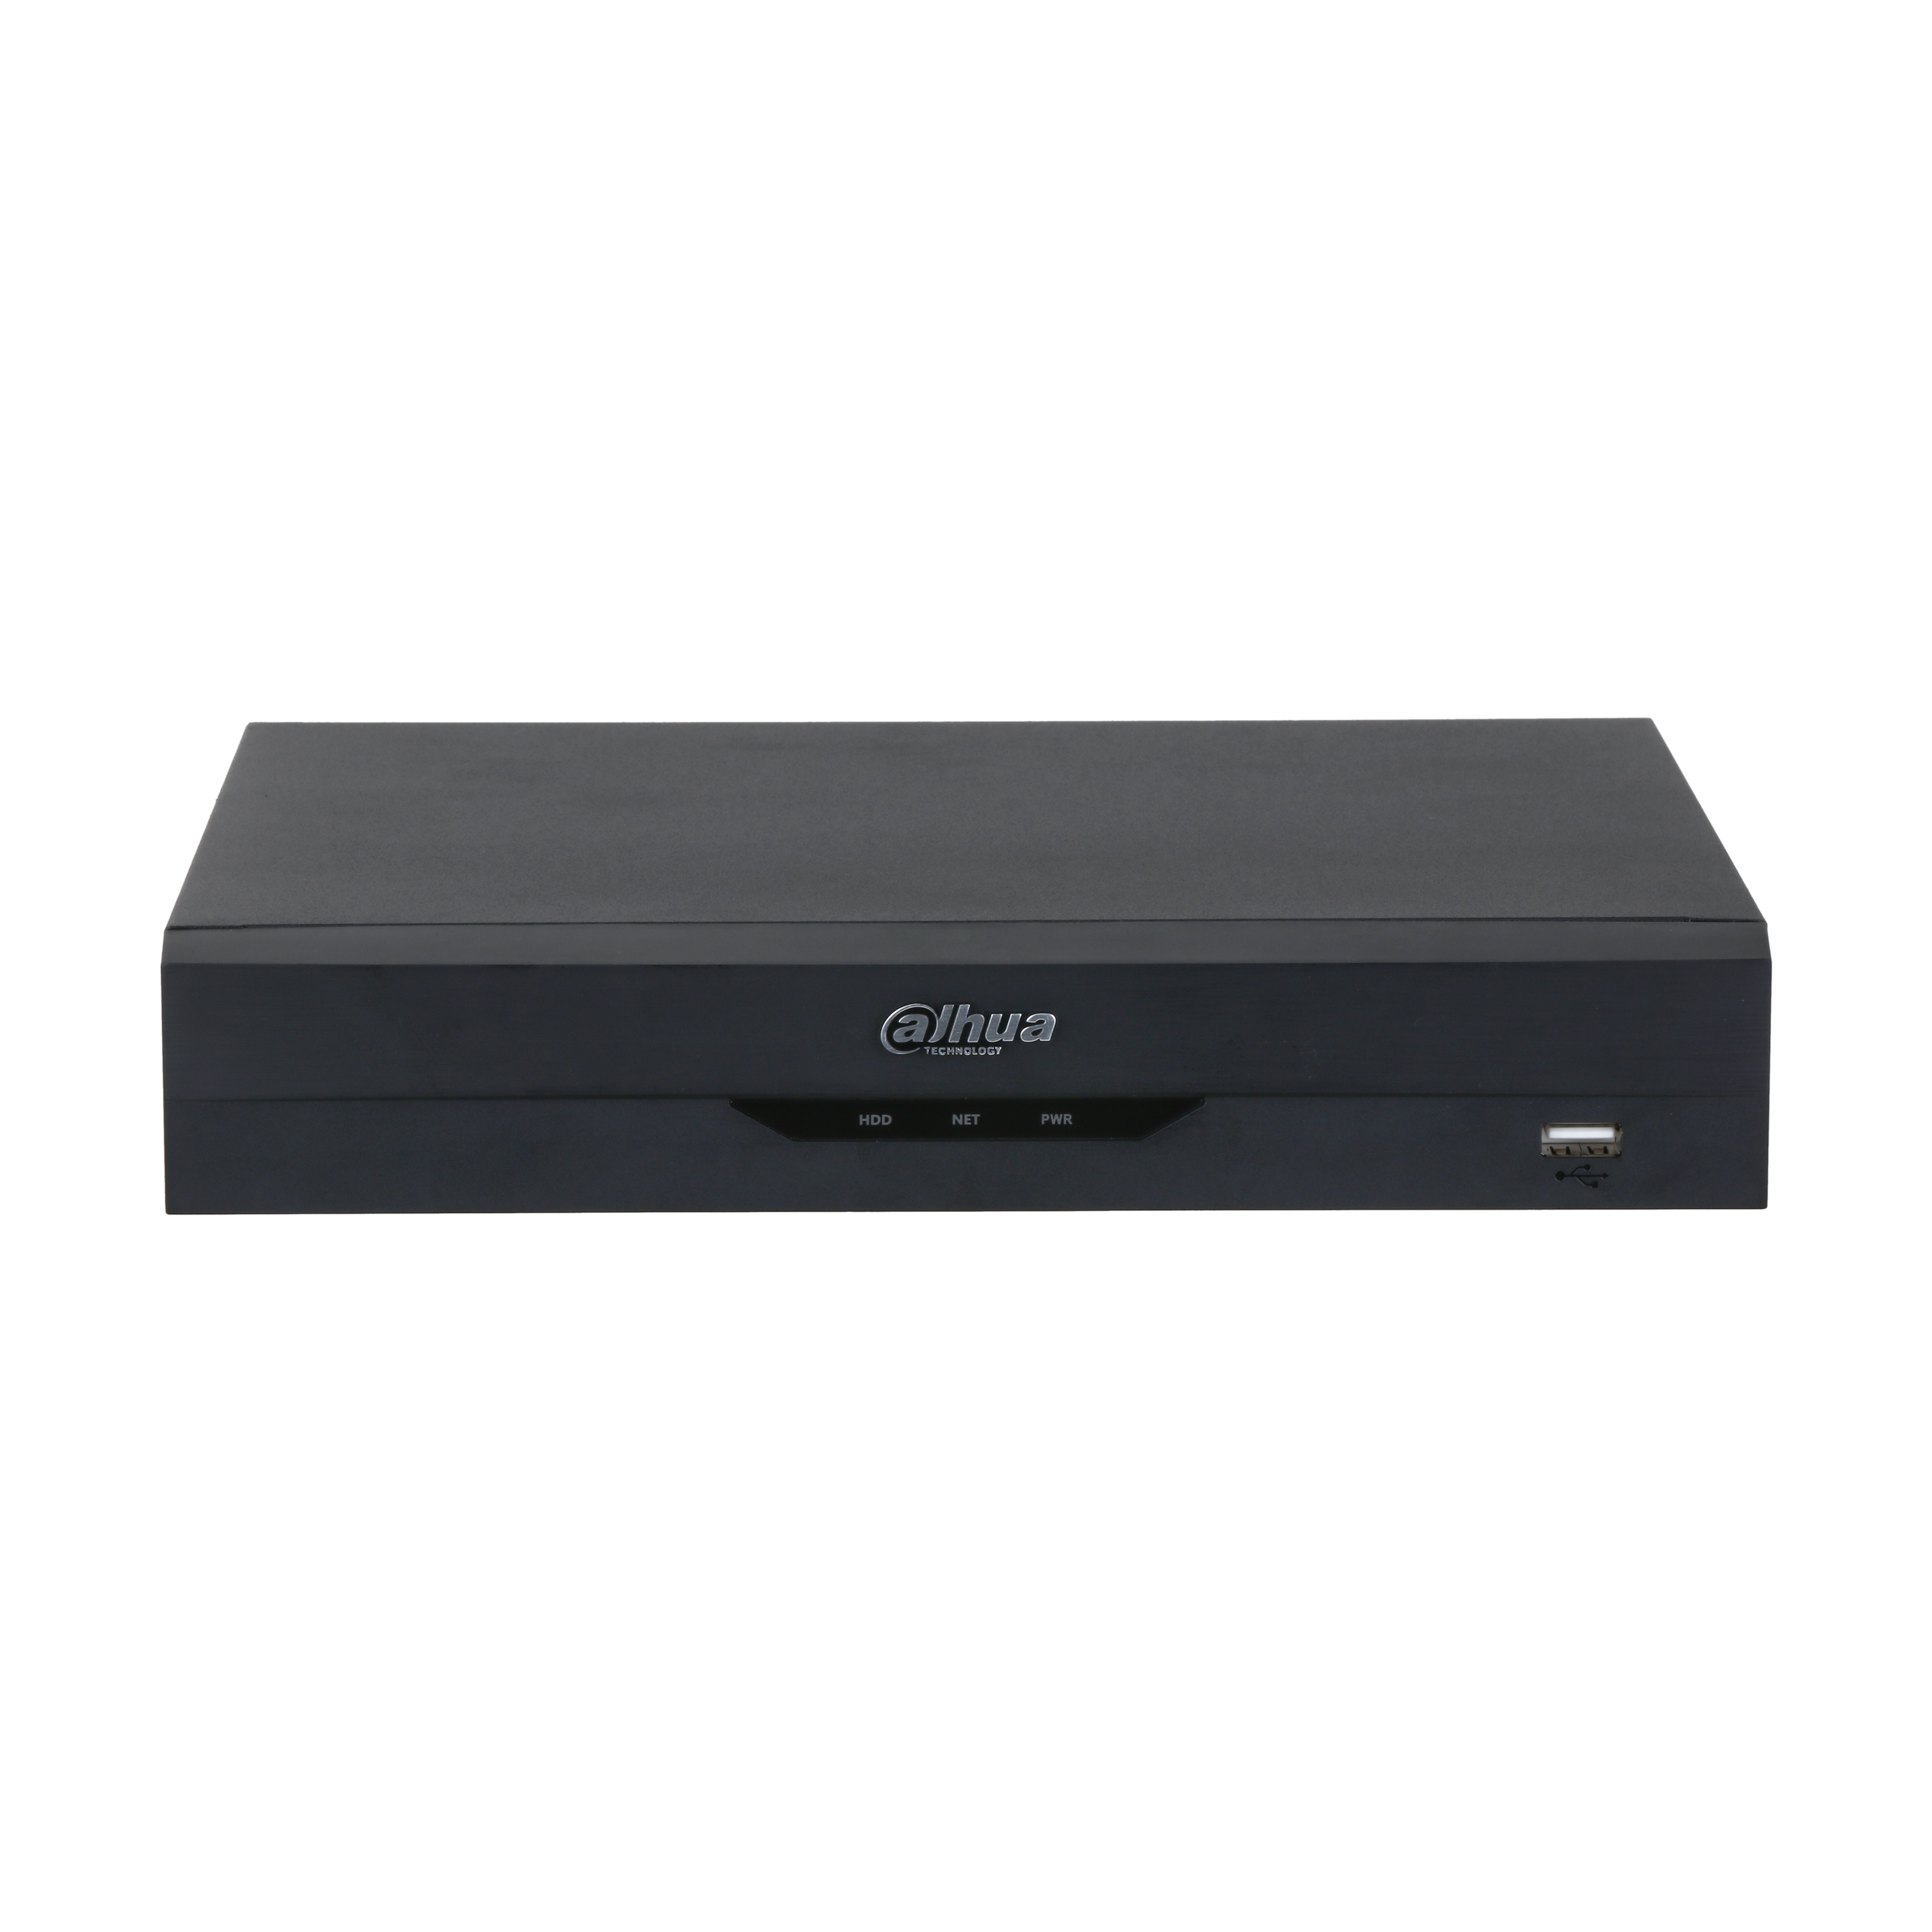 DHI-NVR2108HS-8P-I2 - Dahua - 8 Channel Compact 1U 8PoE 1HDD WizSense Network Video Recorder - 0